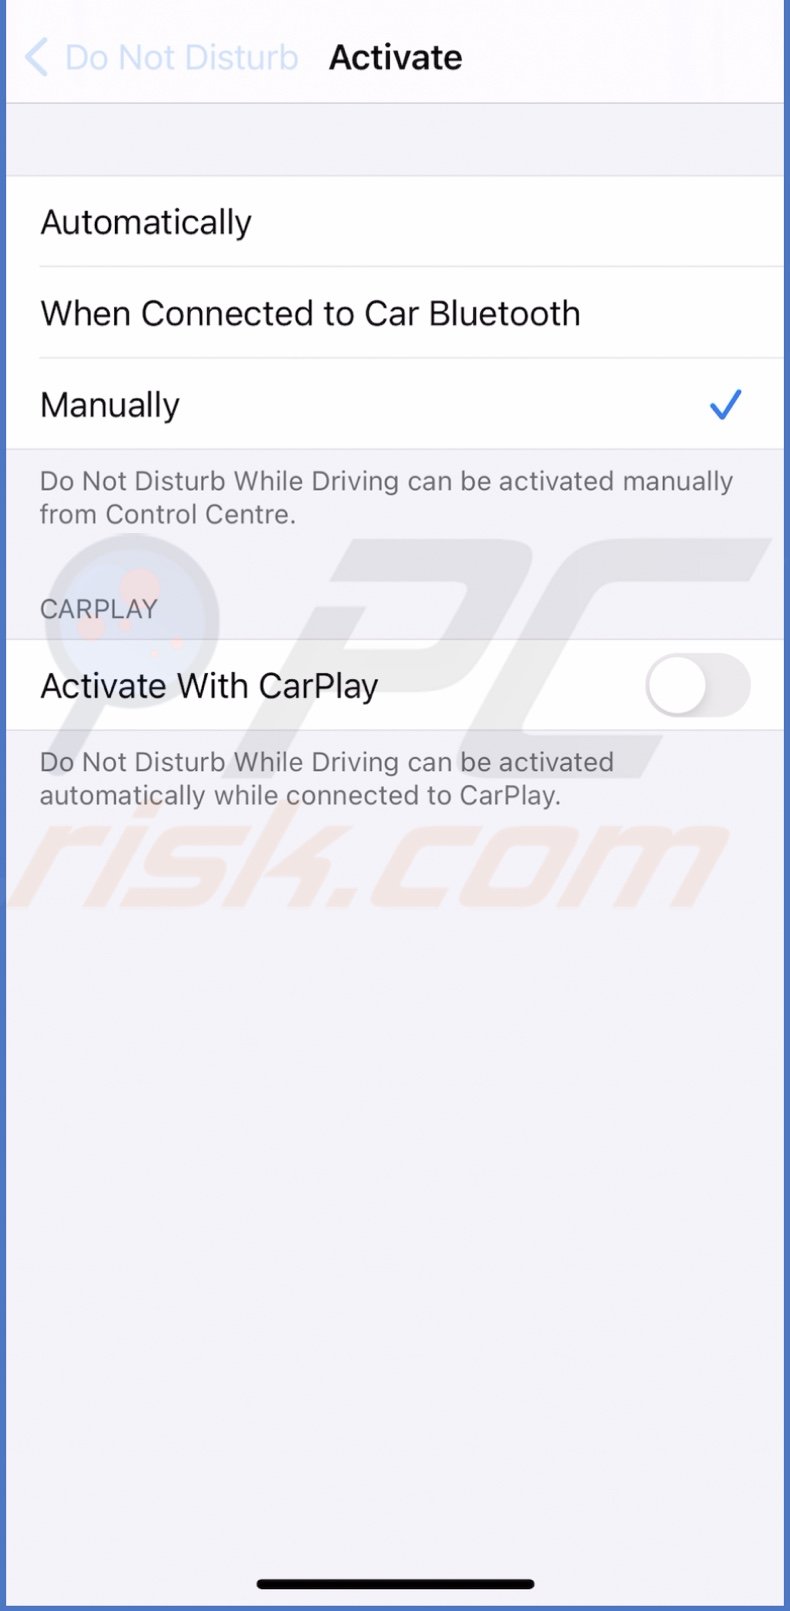 Select how you want to activate the feature